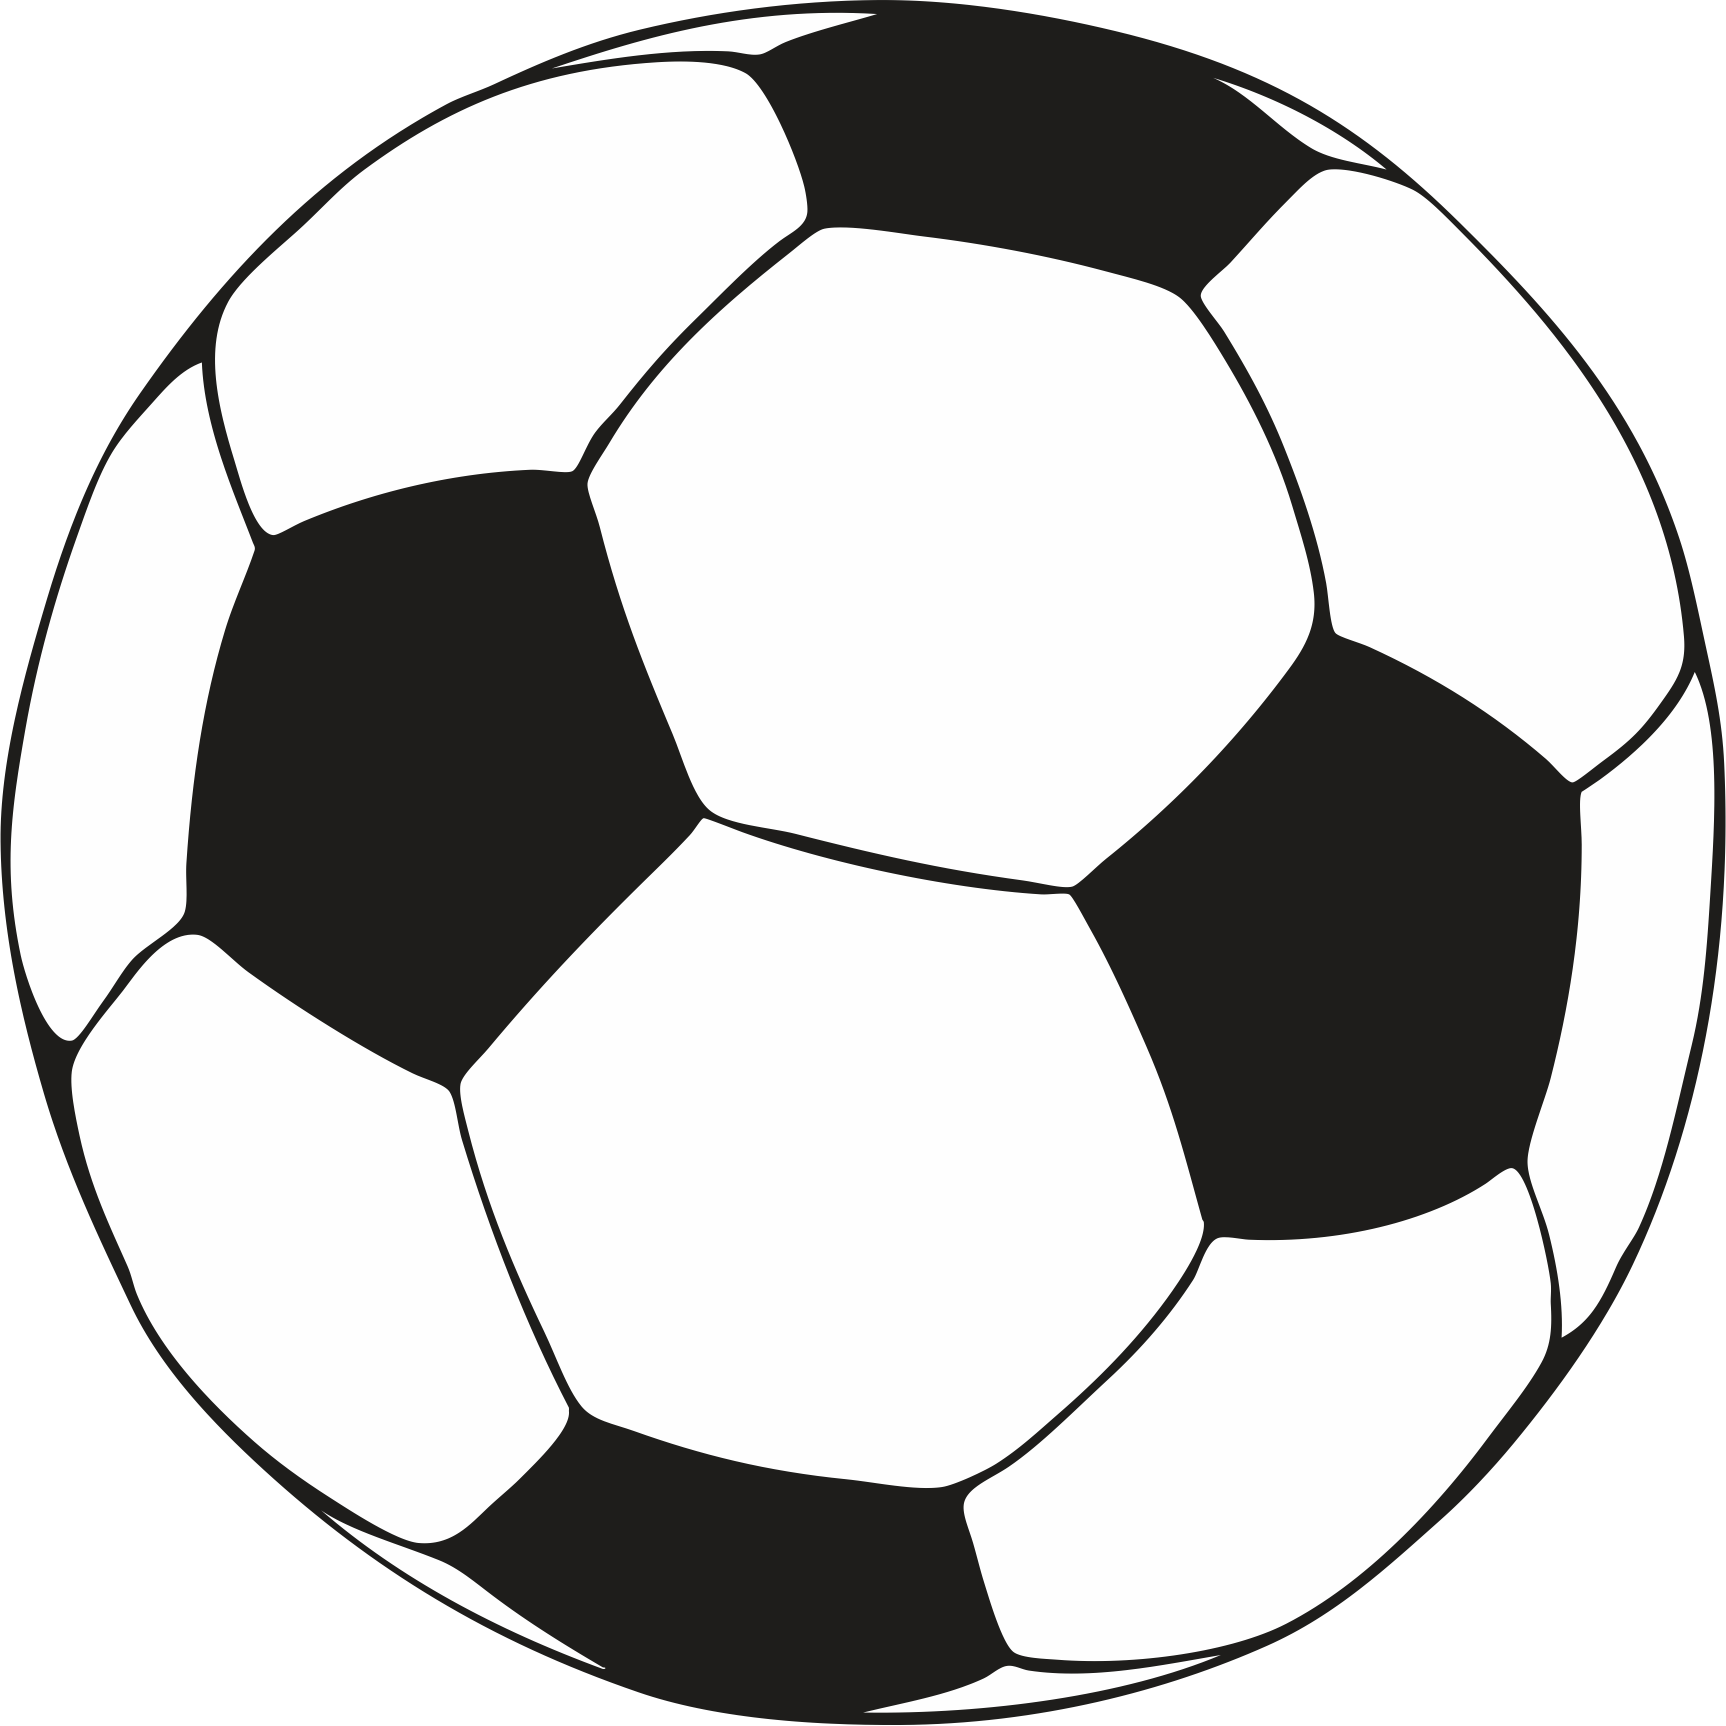 Clip Arts Related To - Soccer Ball For Coloring (1726x1726)